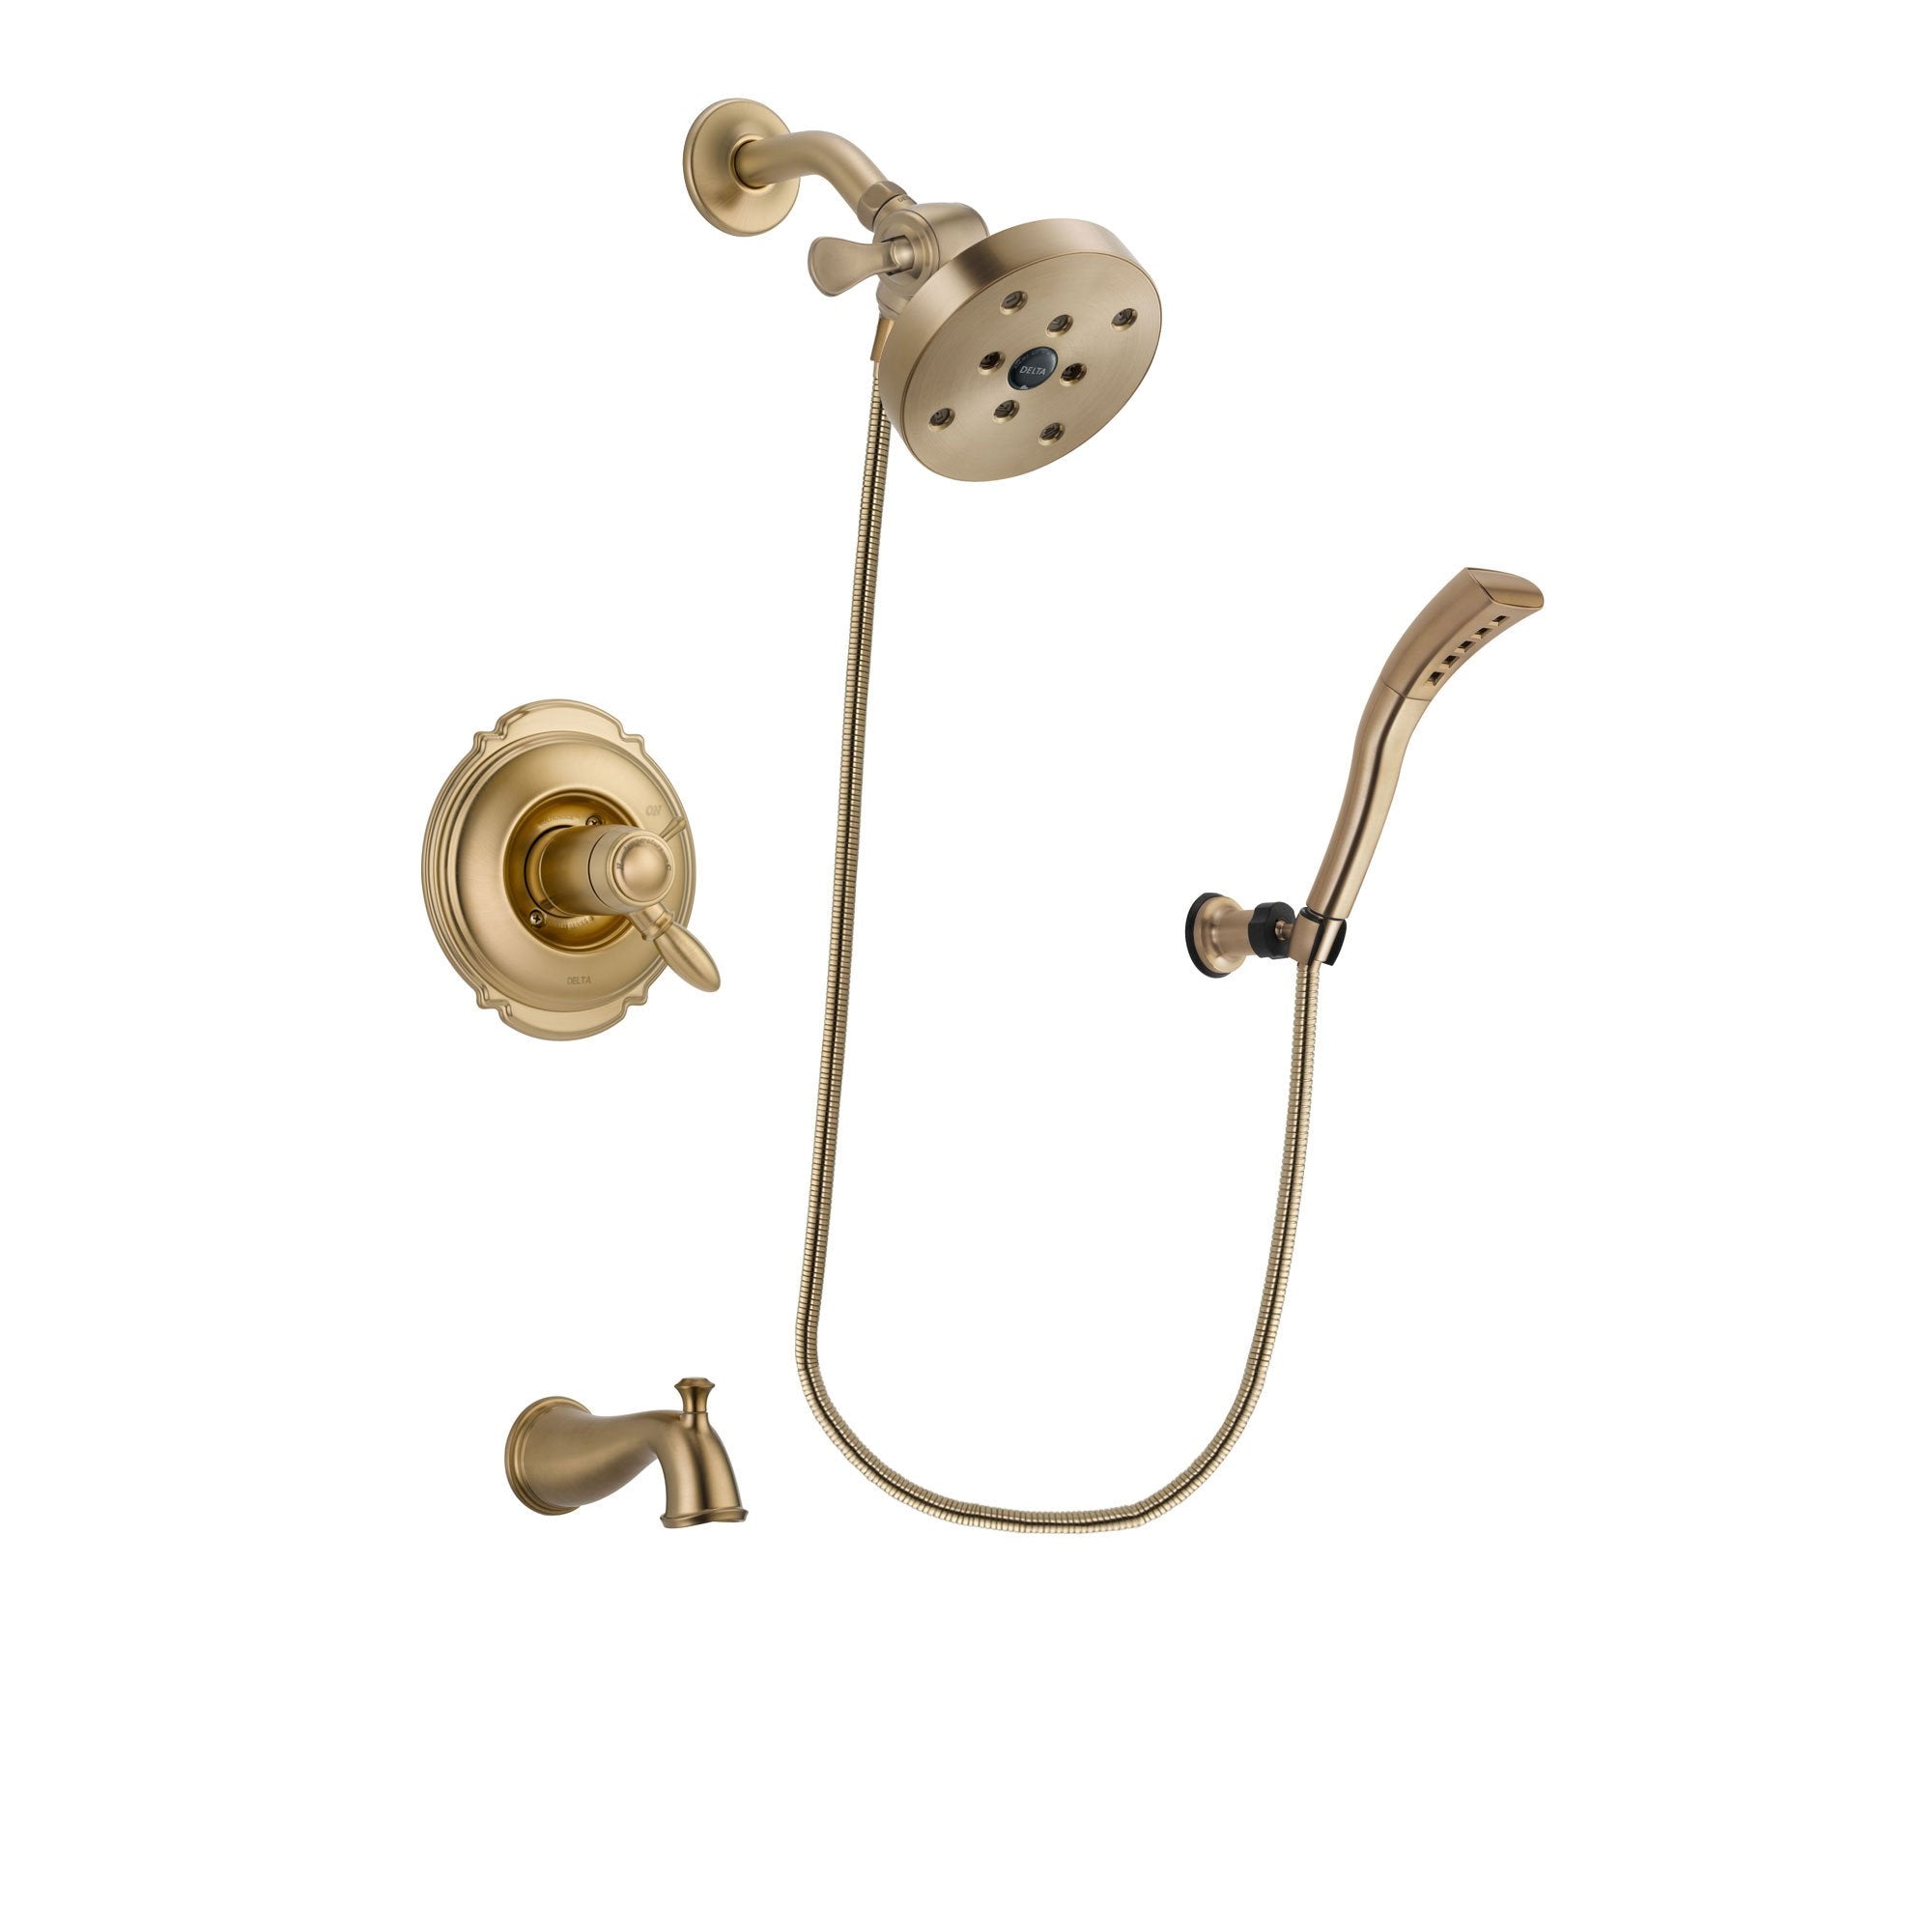 Delta Victorian Champagne Bronze Finish Thermostatic Tub and Shower Faucet System Package with 5-1/2 inch Showerhead and Modern Wall Mount Personal Handheld Shower Spray Includes Rough-in Valve and Tub Spout DSP3709V